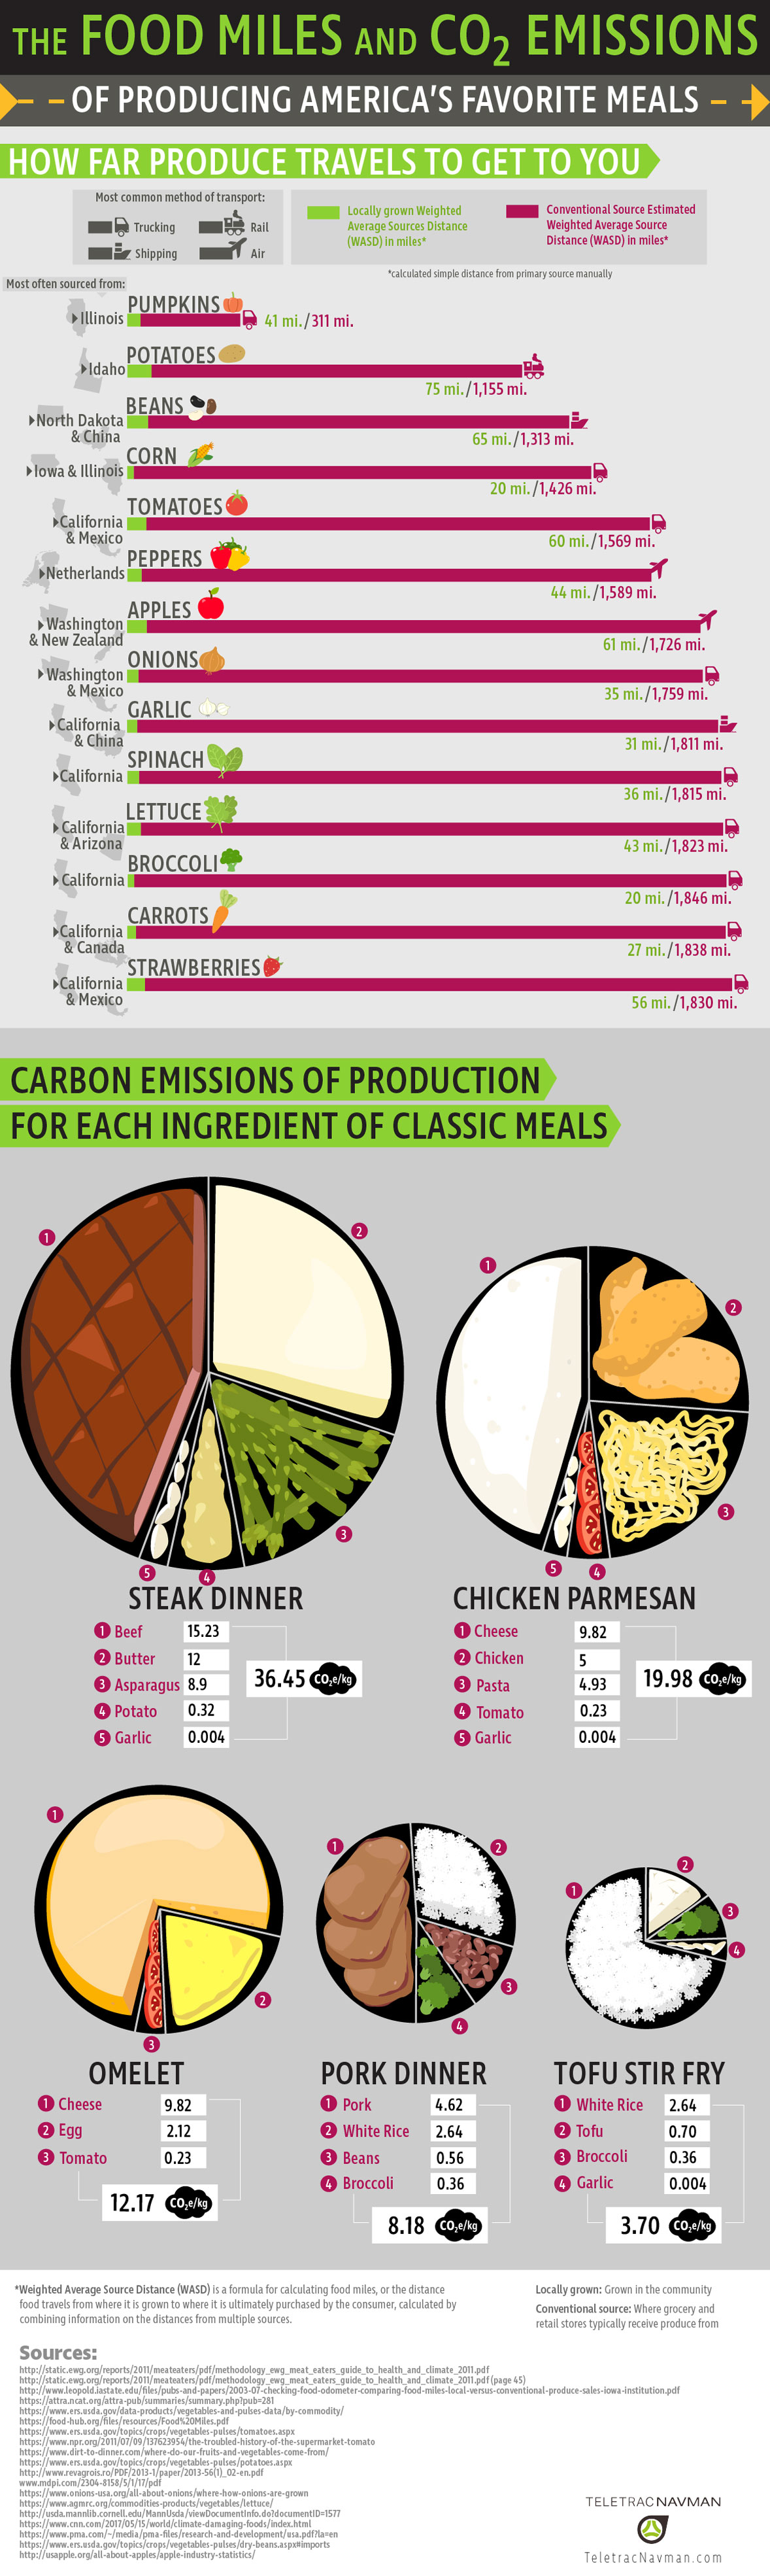 The Food Miles and CO2 Emissions of American Foods - TeletracNavman.com Infographic